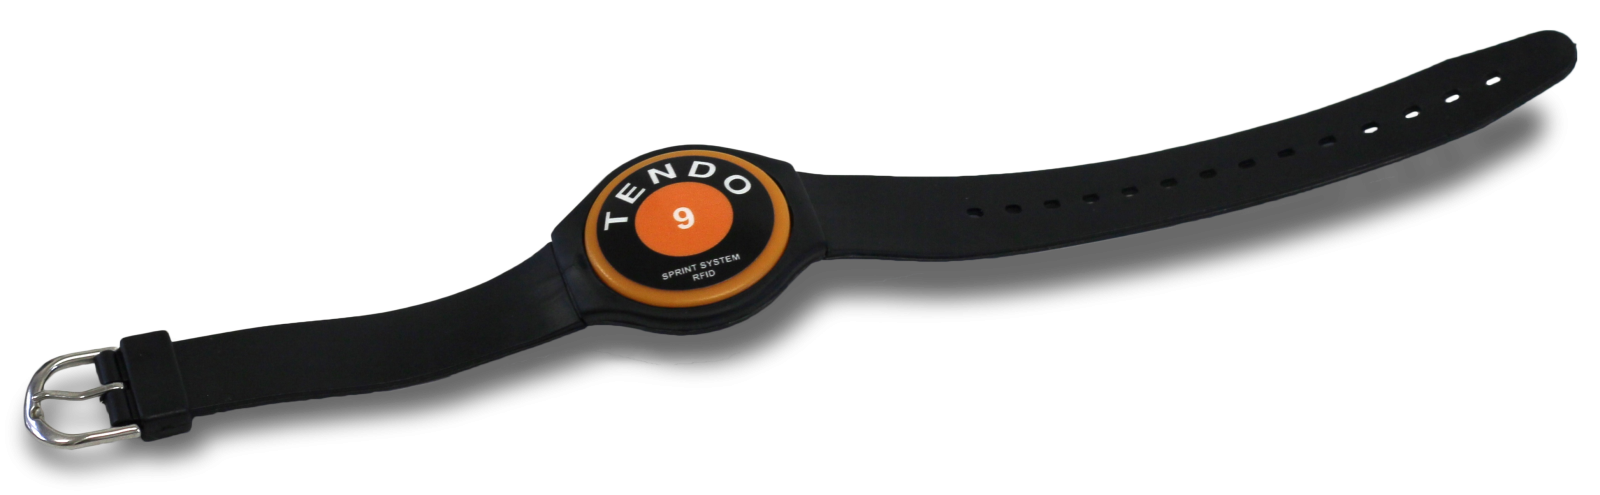 Tendo Sprint System, the timing system wristband by Tendo Sport used for automatic athlete recognition (RFID)